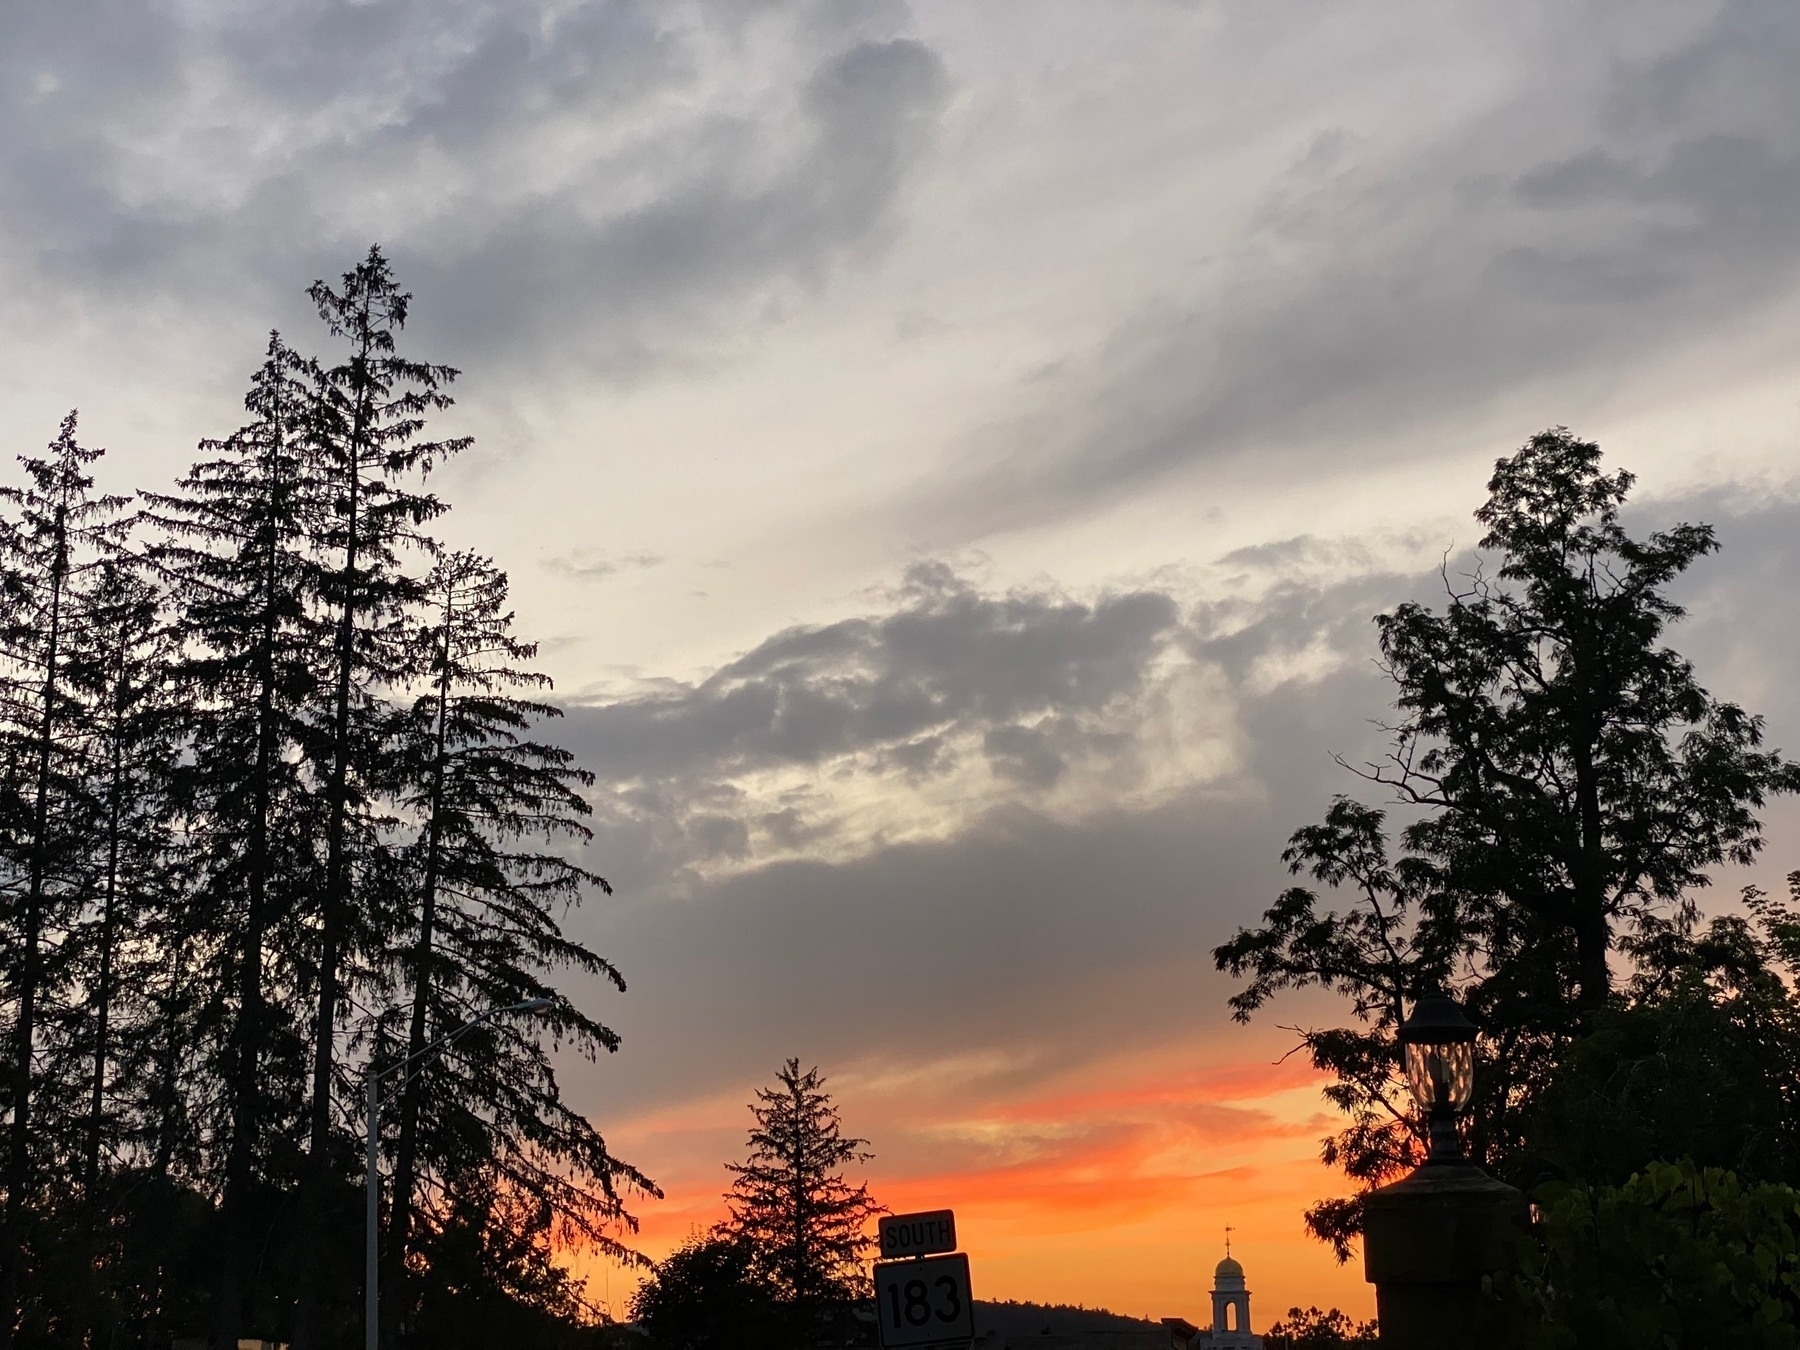 View of a sunset with grey clouds above and orange clouds below, silhouetted by trees on either side.